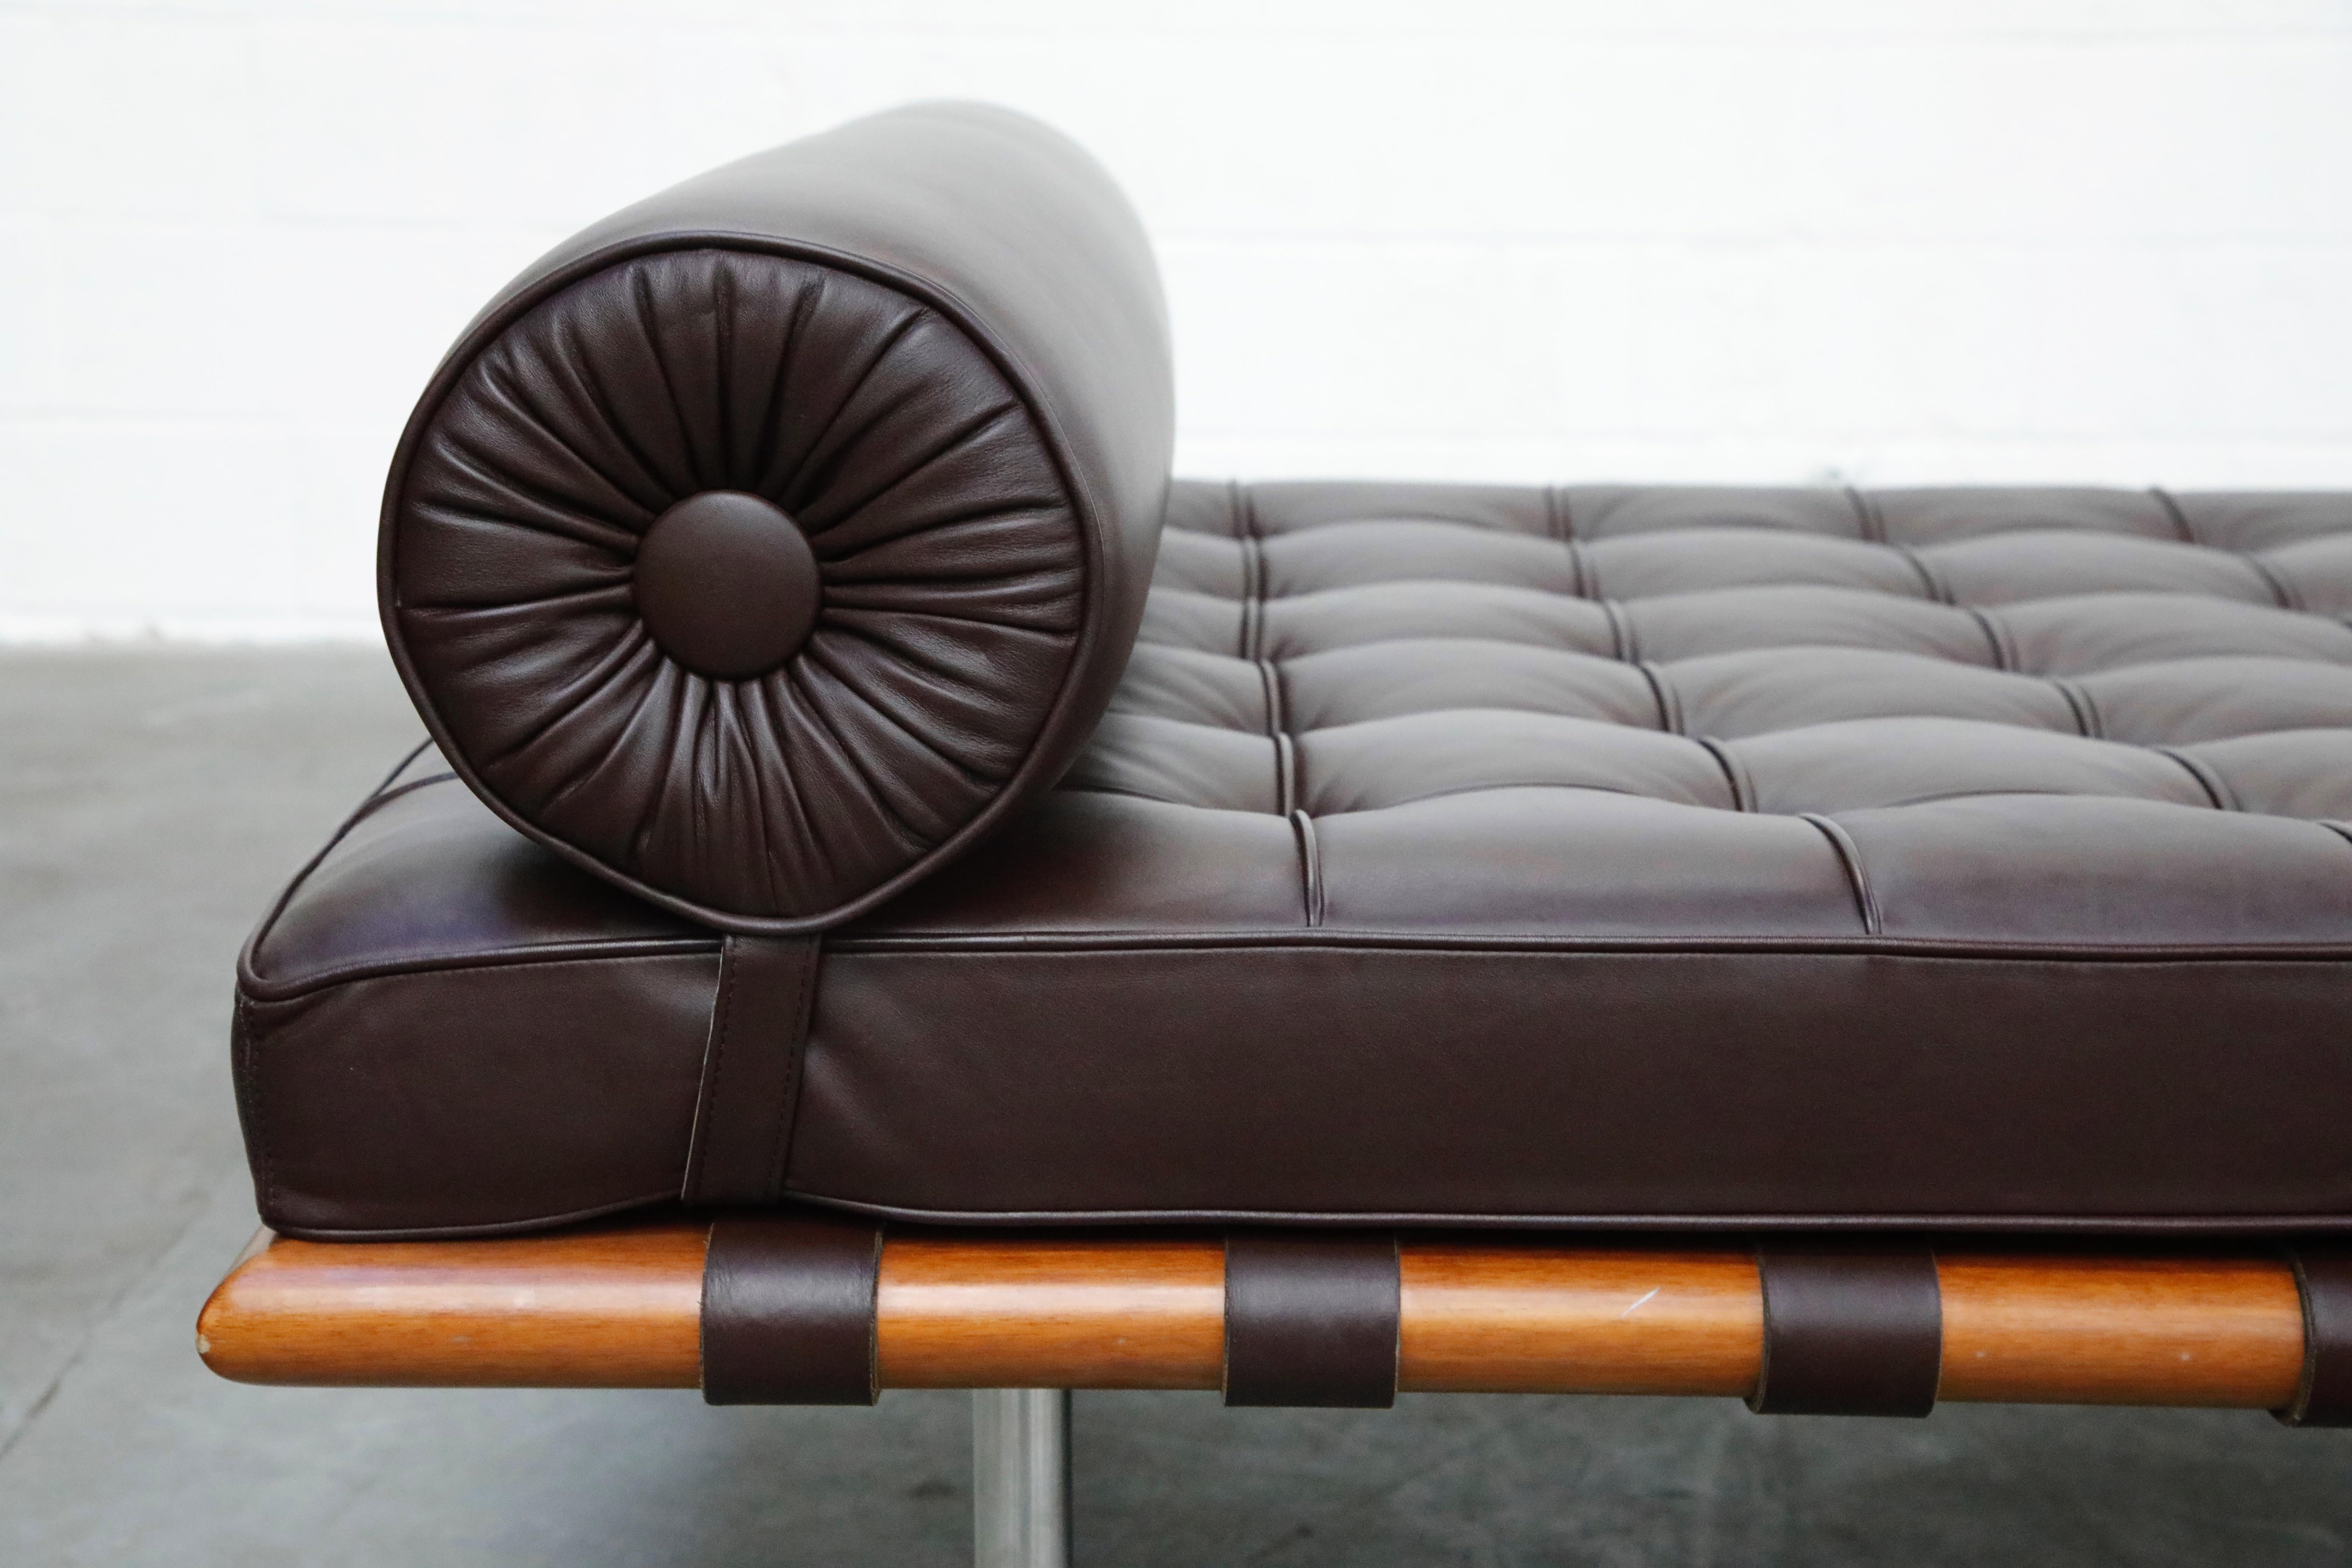 Stainless Steel Barcelona Daybed by Mies Van Der Rohe for Knoll in Dark Brown Leather, Signed